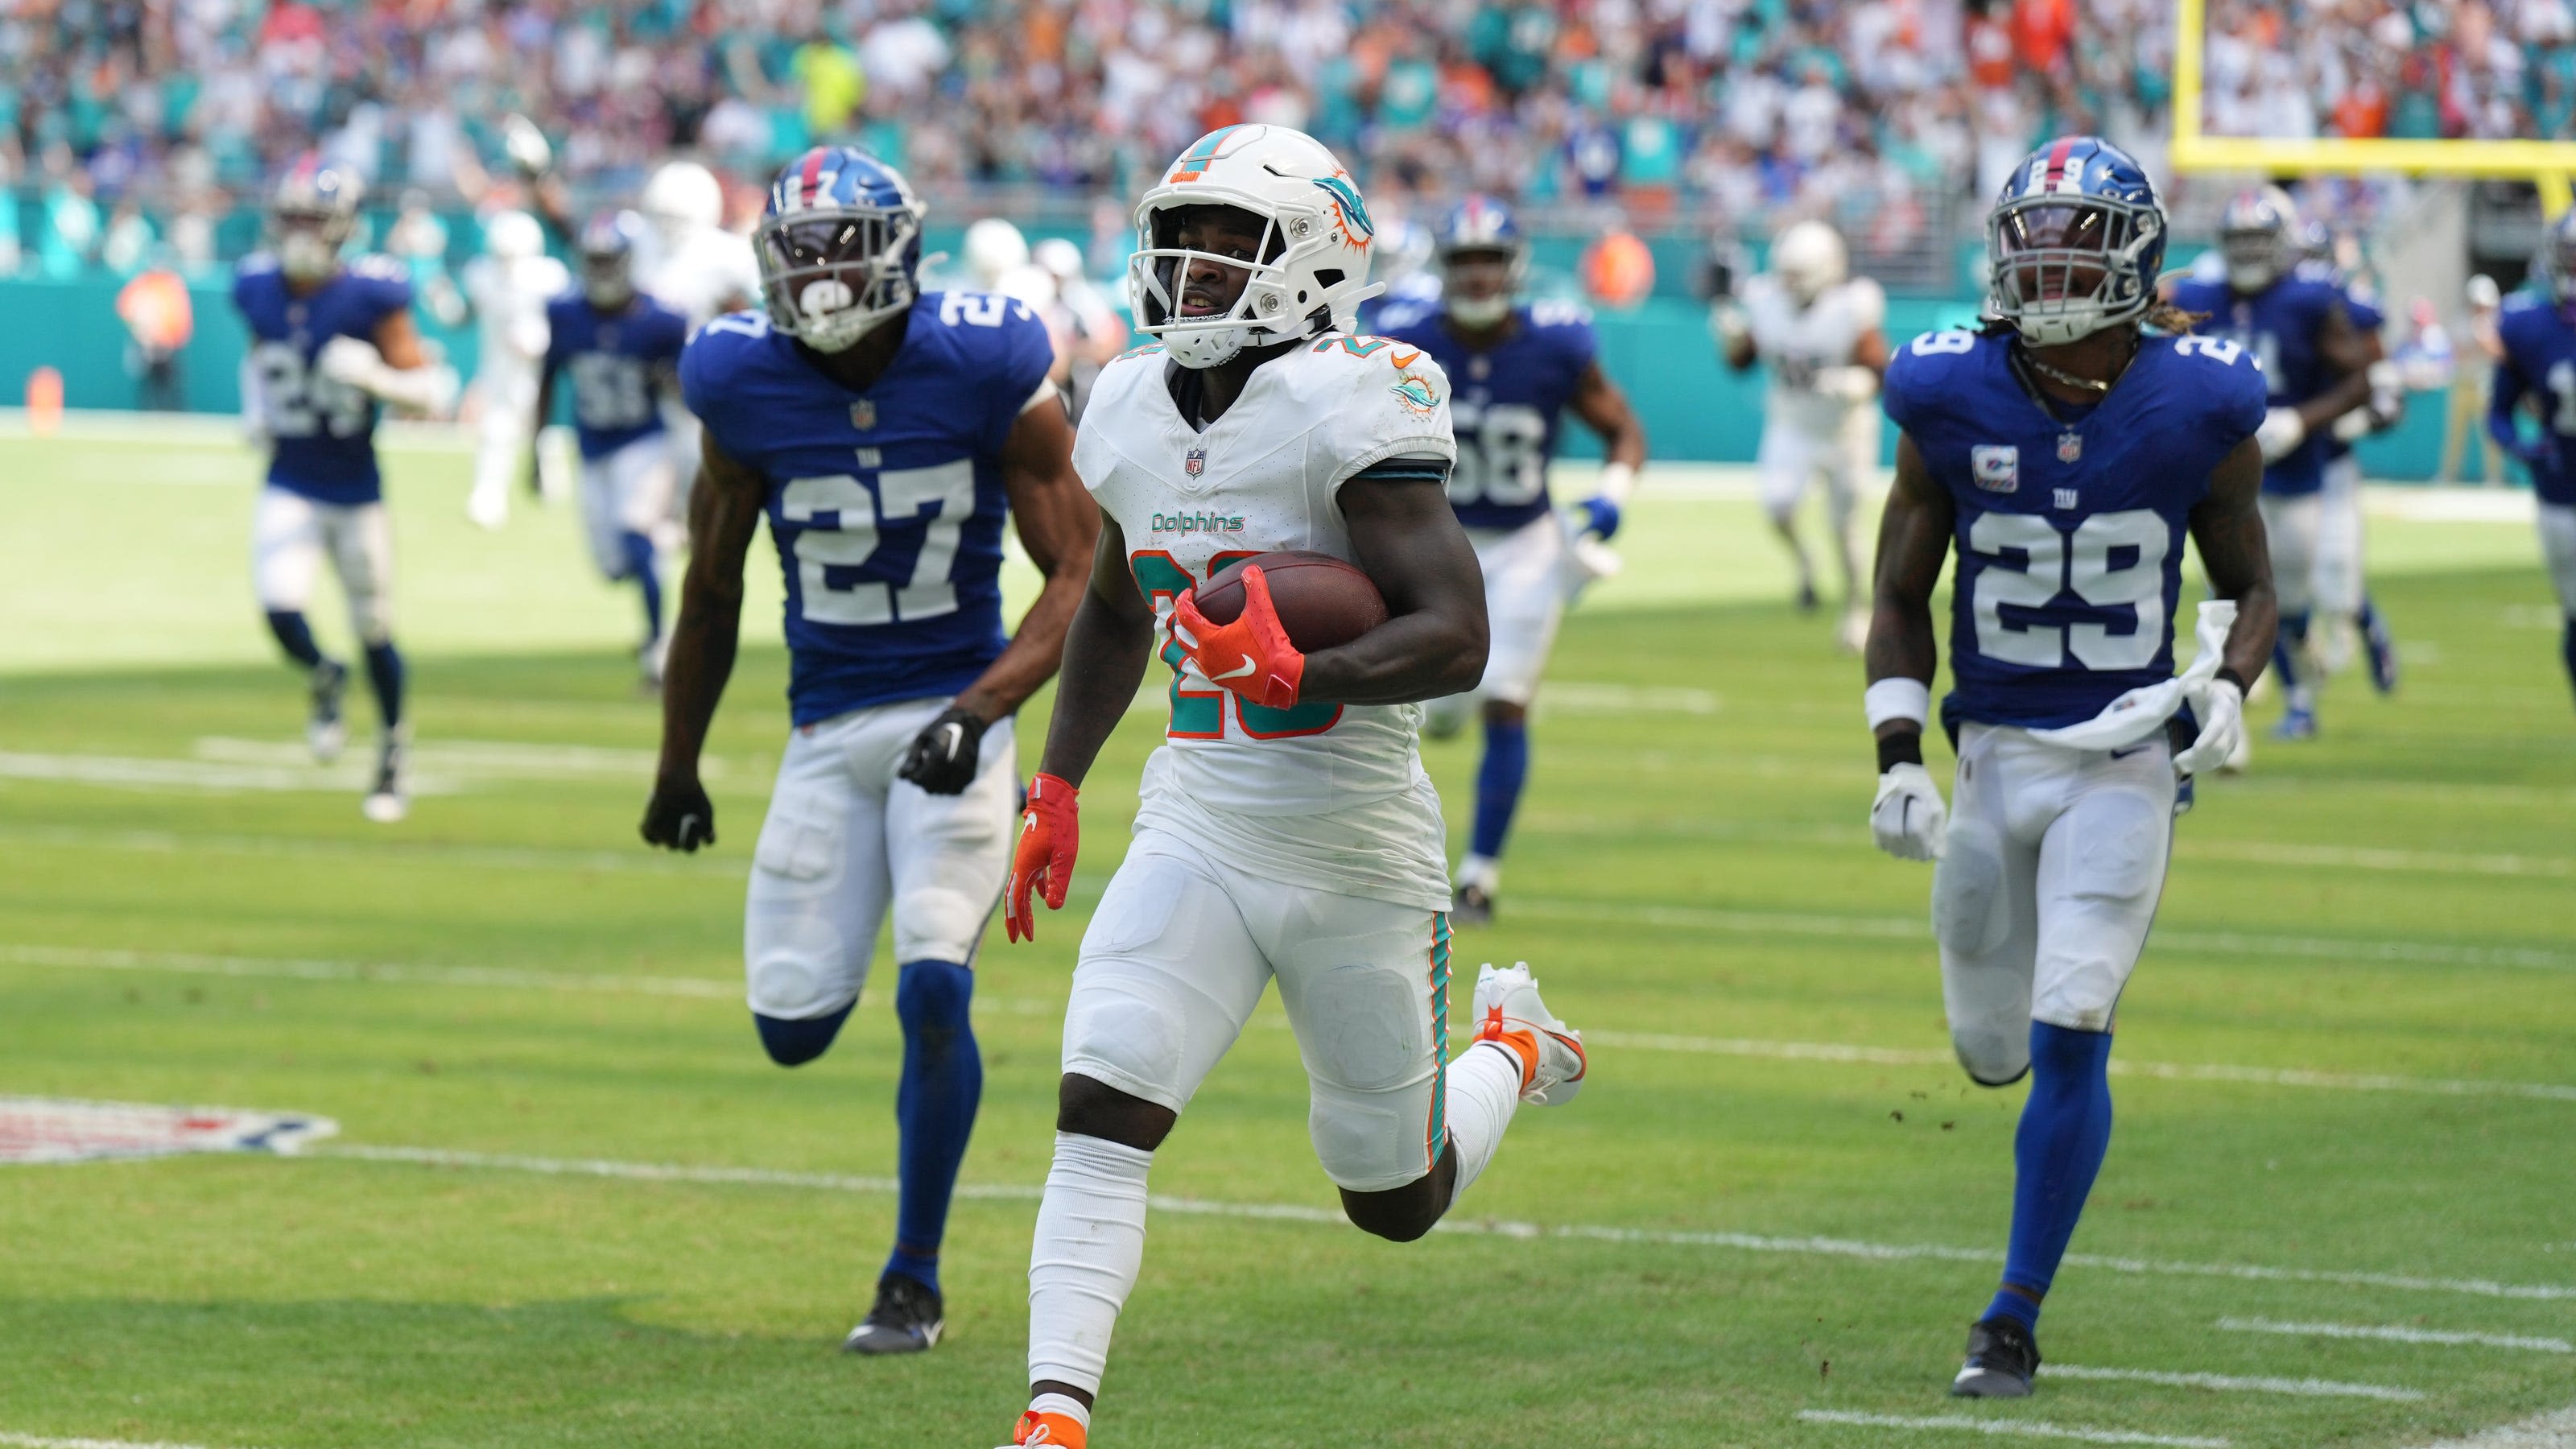 We knew the Miami Dolphins had speed, but Madden 25 player ratings show just how fast